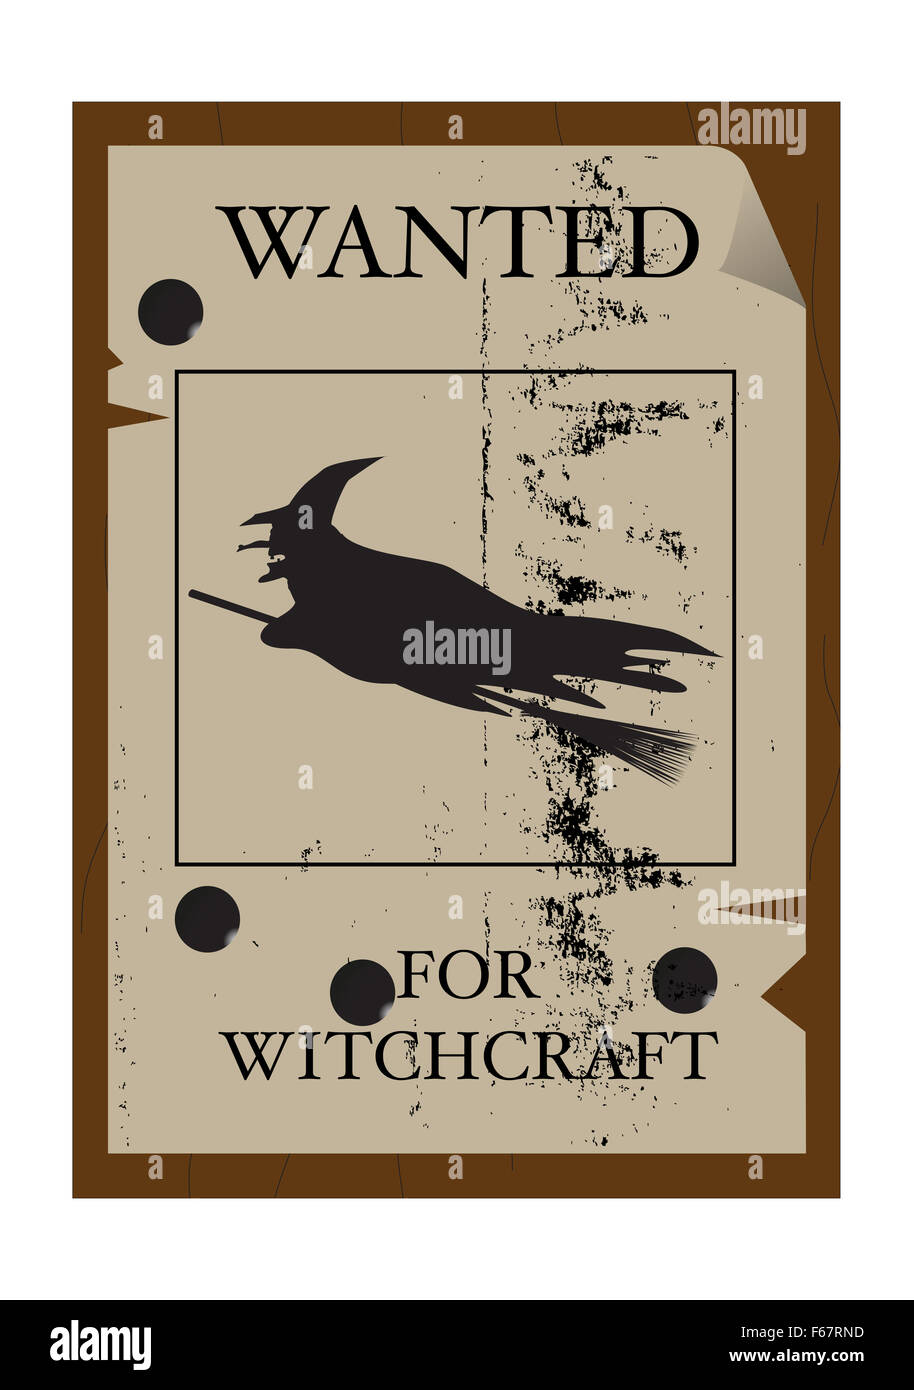 A wanted for witchcraft poster, grunged and isolated on a white background Stock Photo